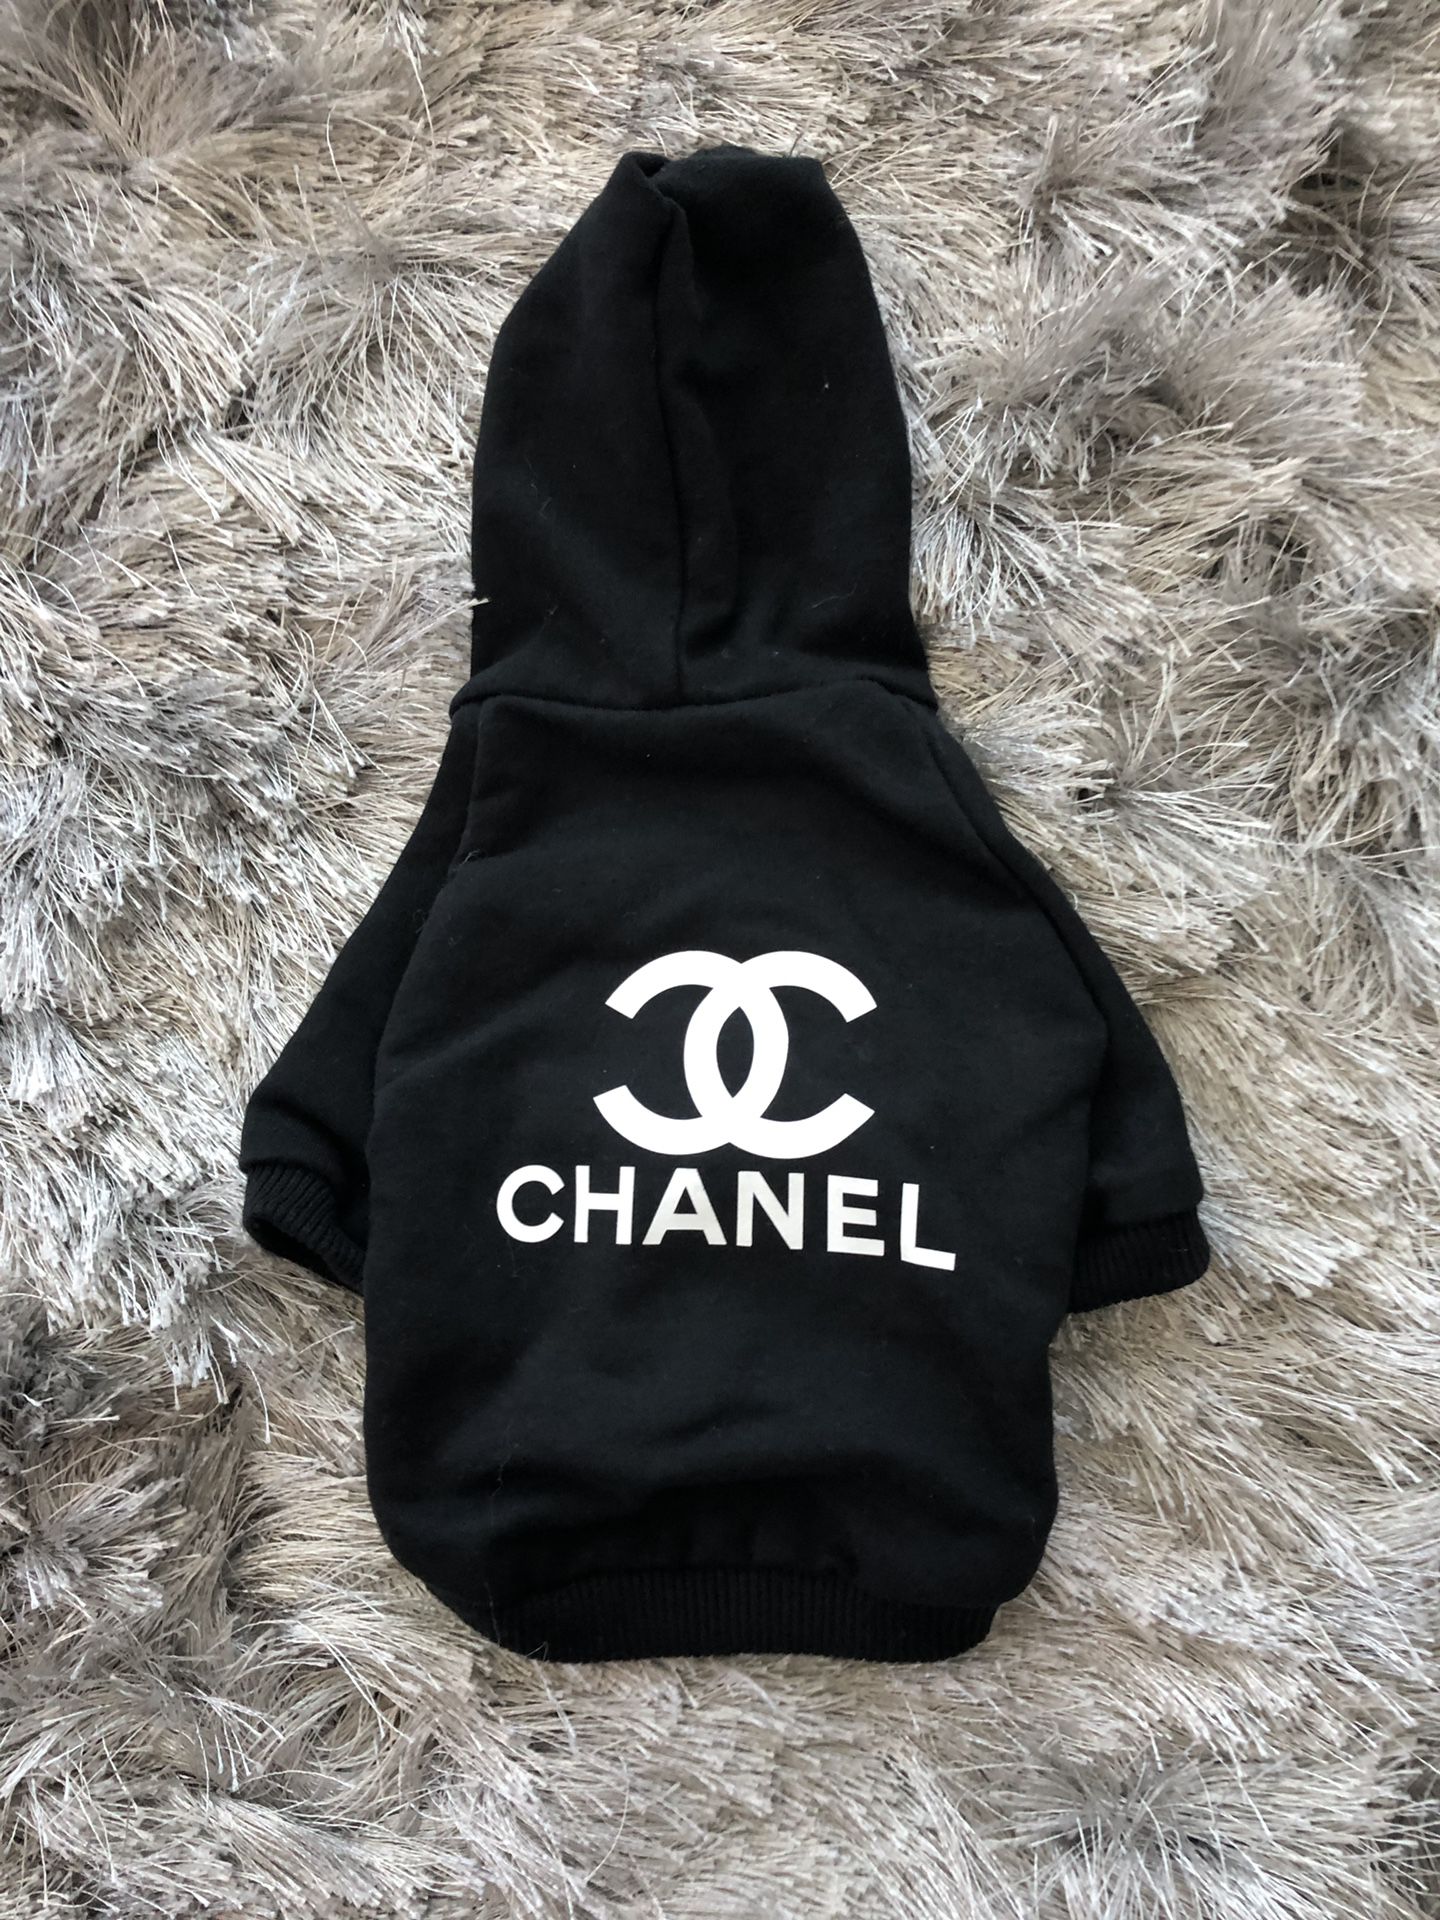 CHANEL DOG HOODIE CLOTHES BLACK XS for Sale in Los